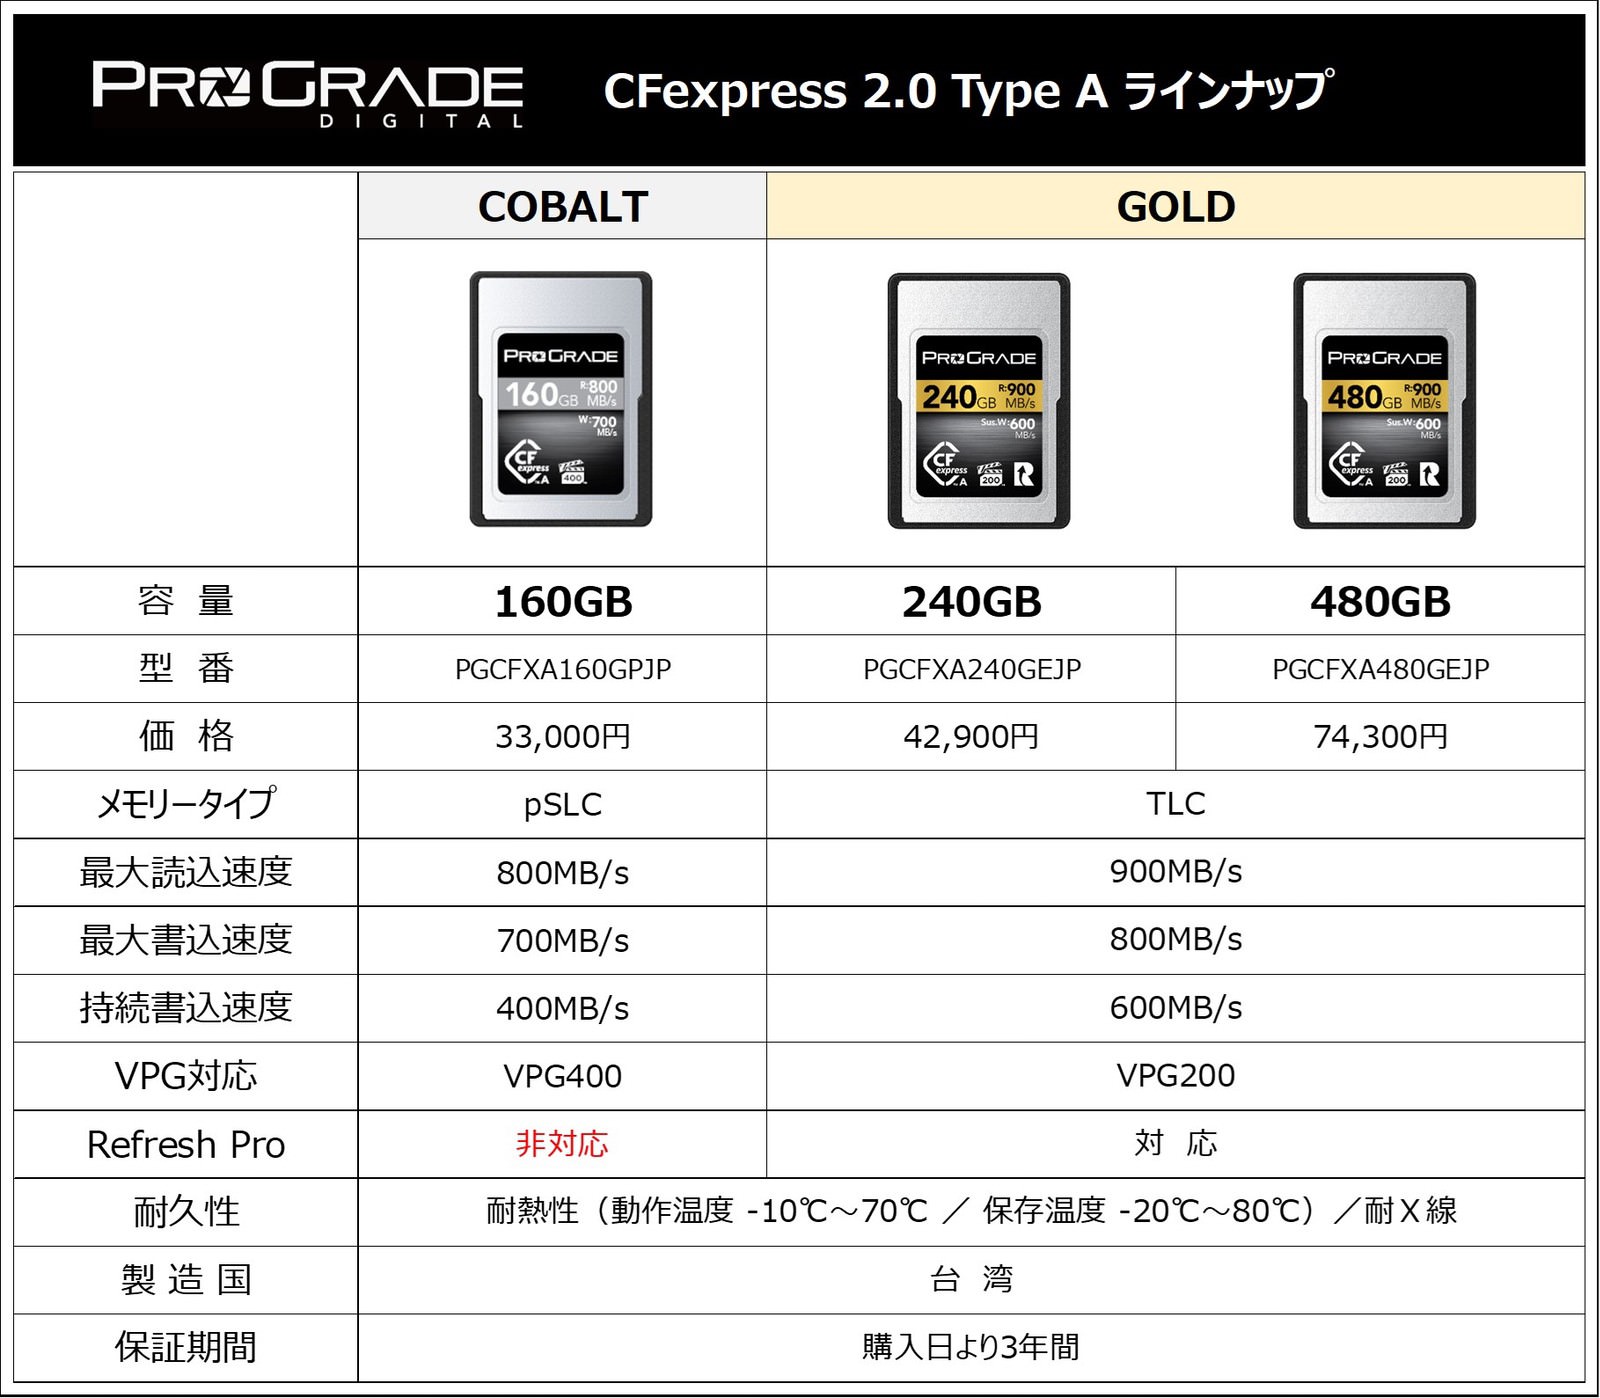 Sony CFexpress card new gold model 02